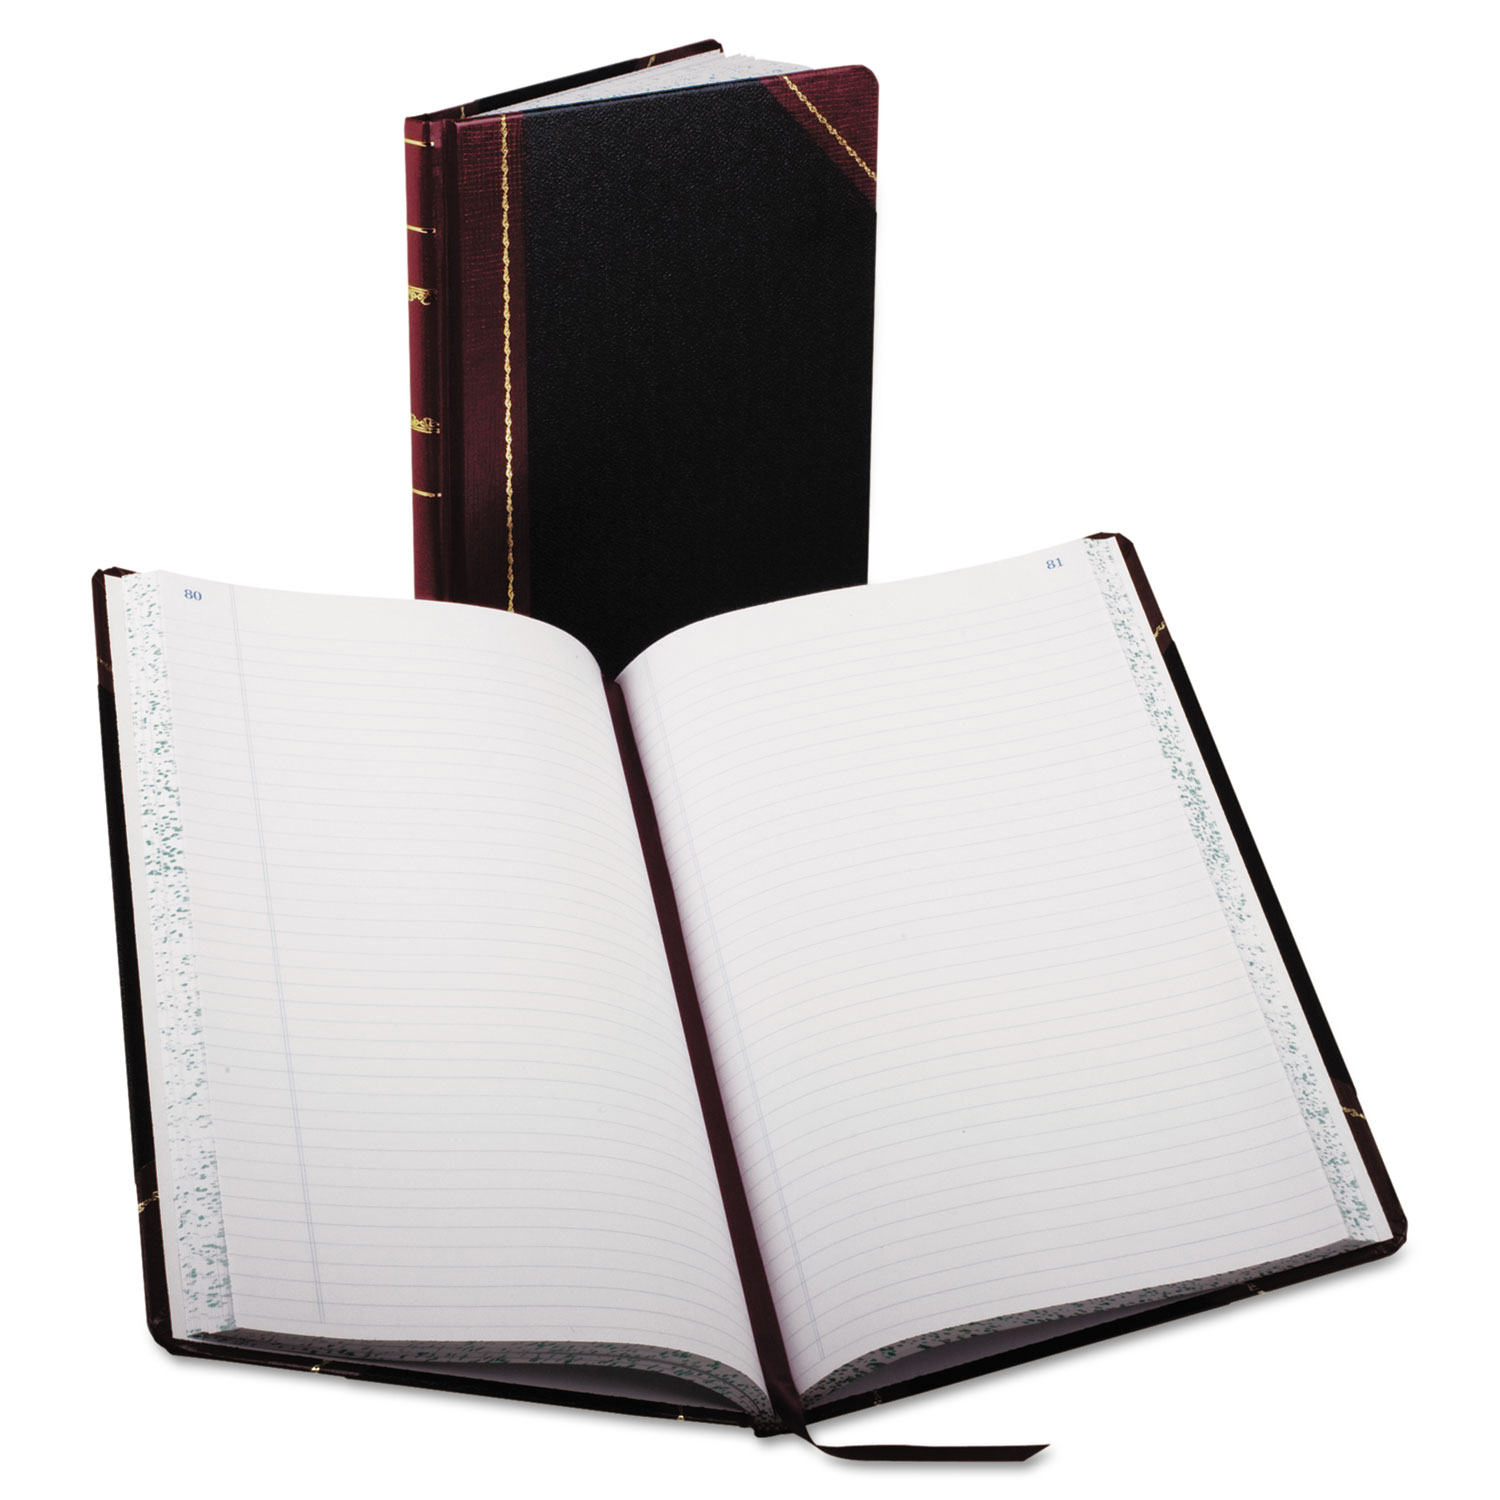  Boorum & Pease 9-150-R Record/Account Book, Black/Red Cover, 150 Pages, 14 1/8 x 8 5/8 (BOR9150R) 